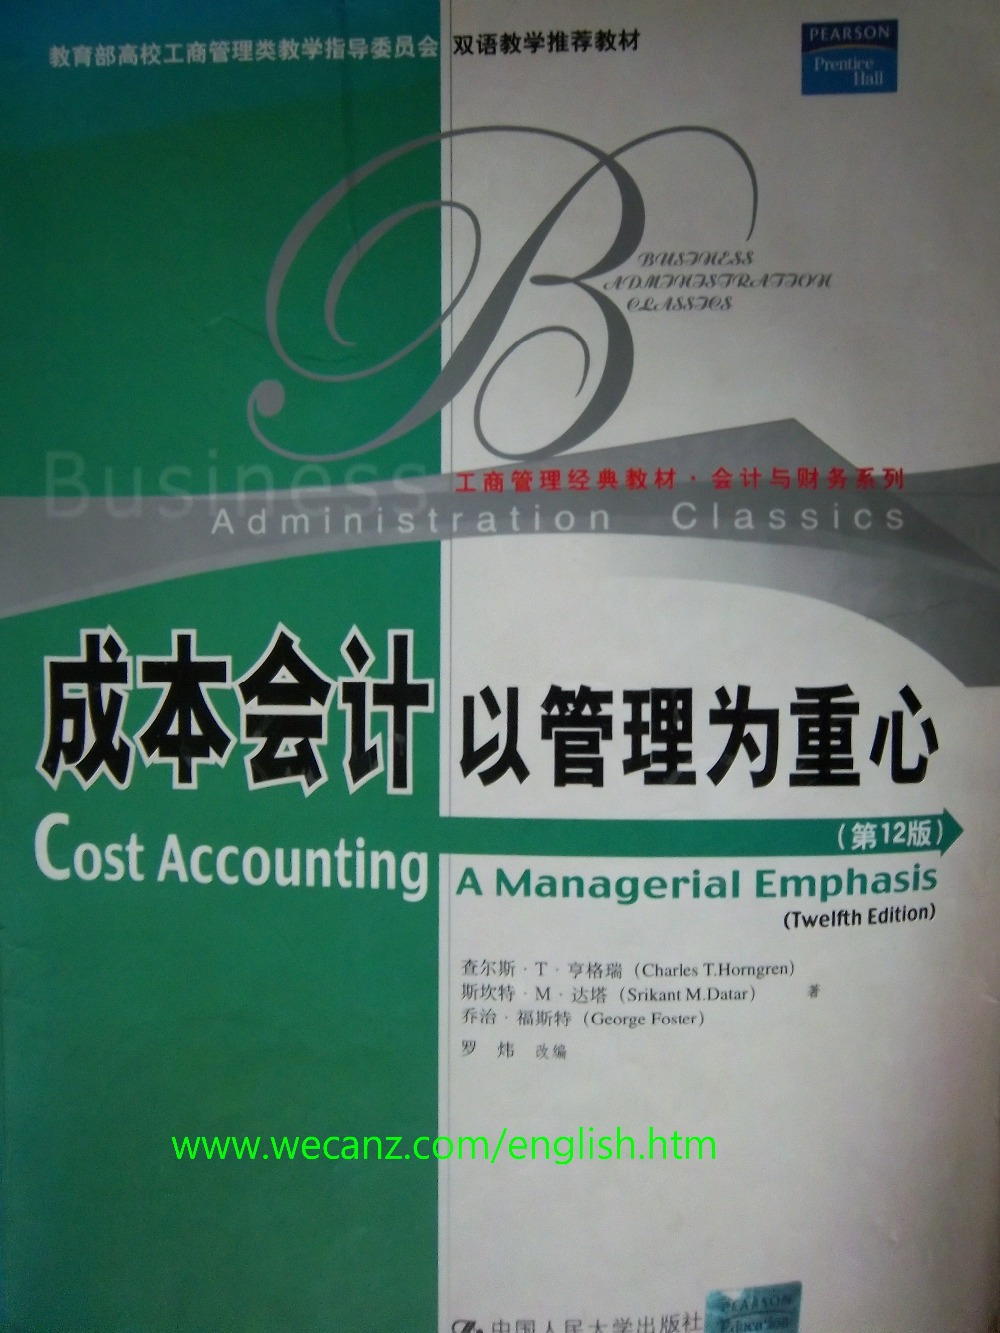 Cost Accounting 14th Edition Solutions H18 - ojunnet